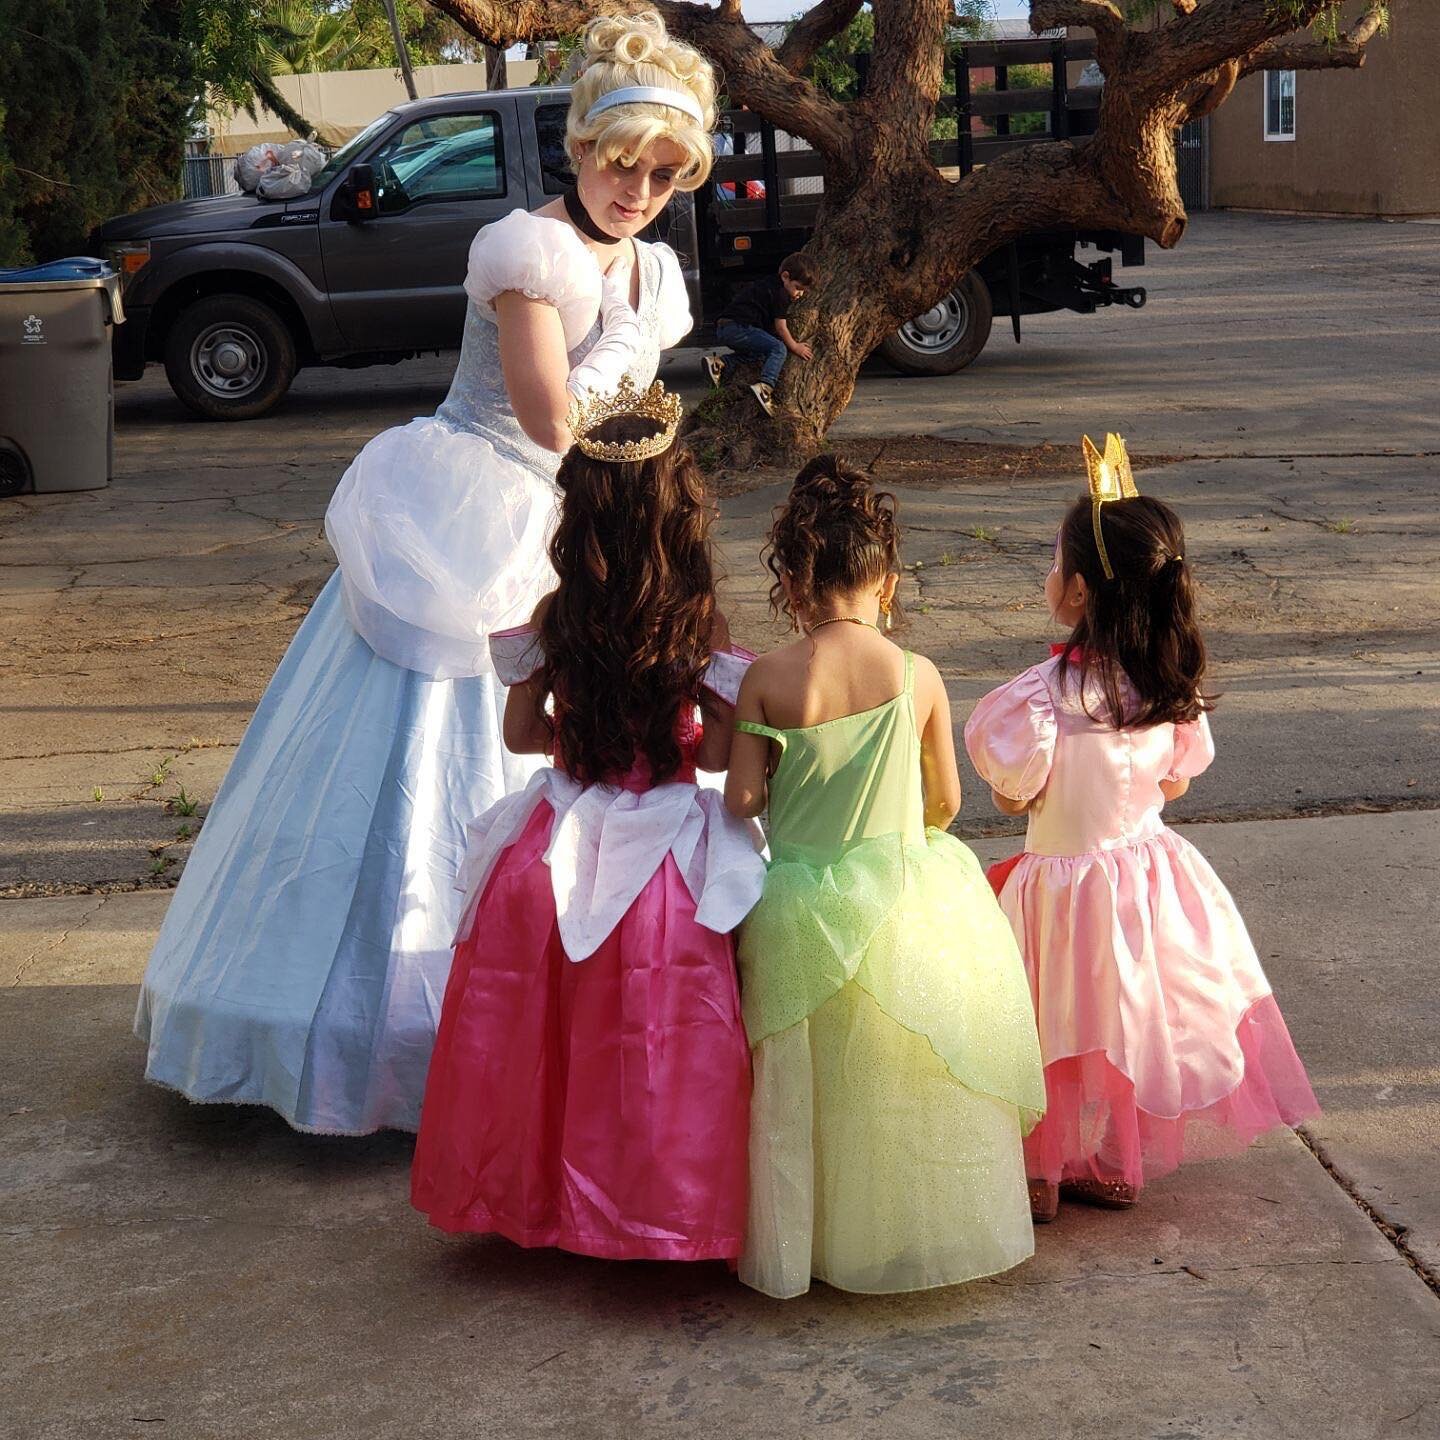 Making little dreams come true one party at a time! 🥹💗 Great start off to our weekend! 

&bull;

&bull;

&bull;

#cinderella #princess #princessparties #fairytales #kidparties #livingston #delhica #hilmar #modesto #merced #stockton #lodi #centralva